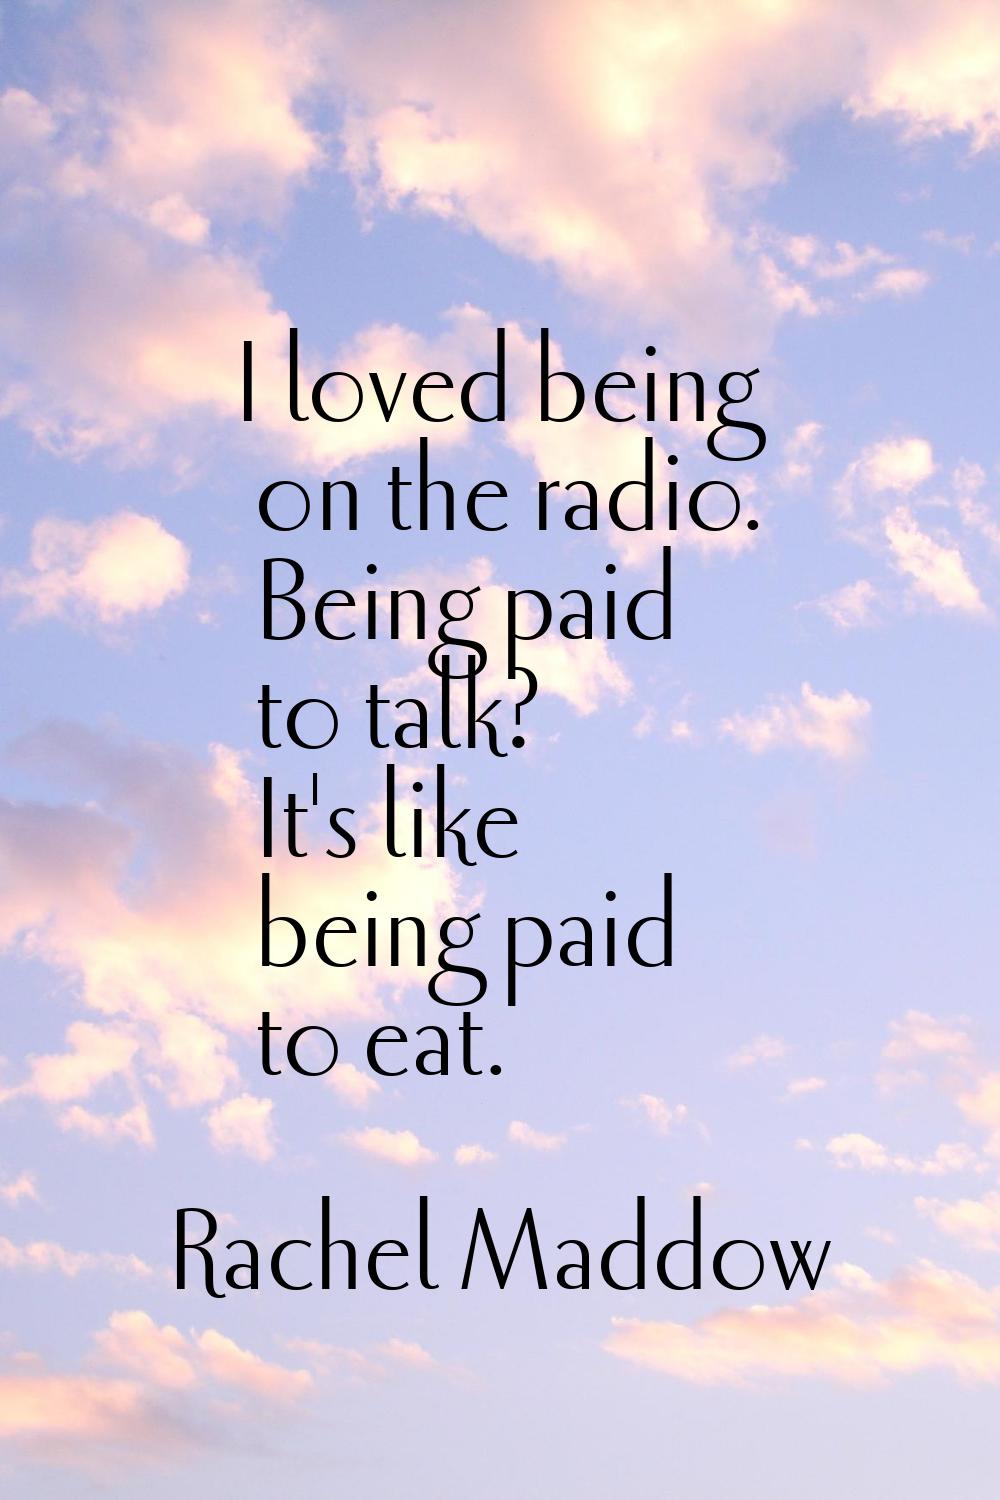 I loved being on the radio. Being paid to talk? It's like being paid to eat.